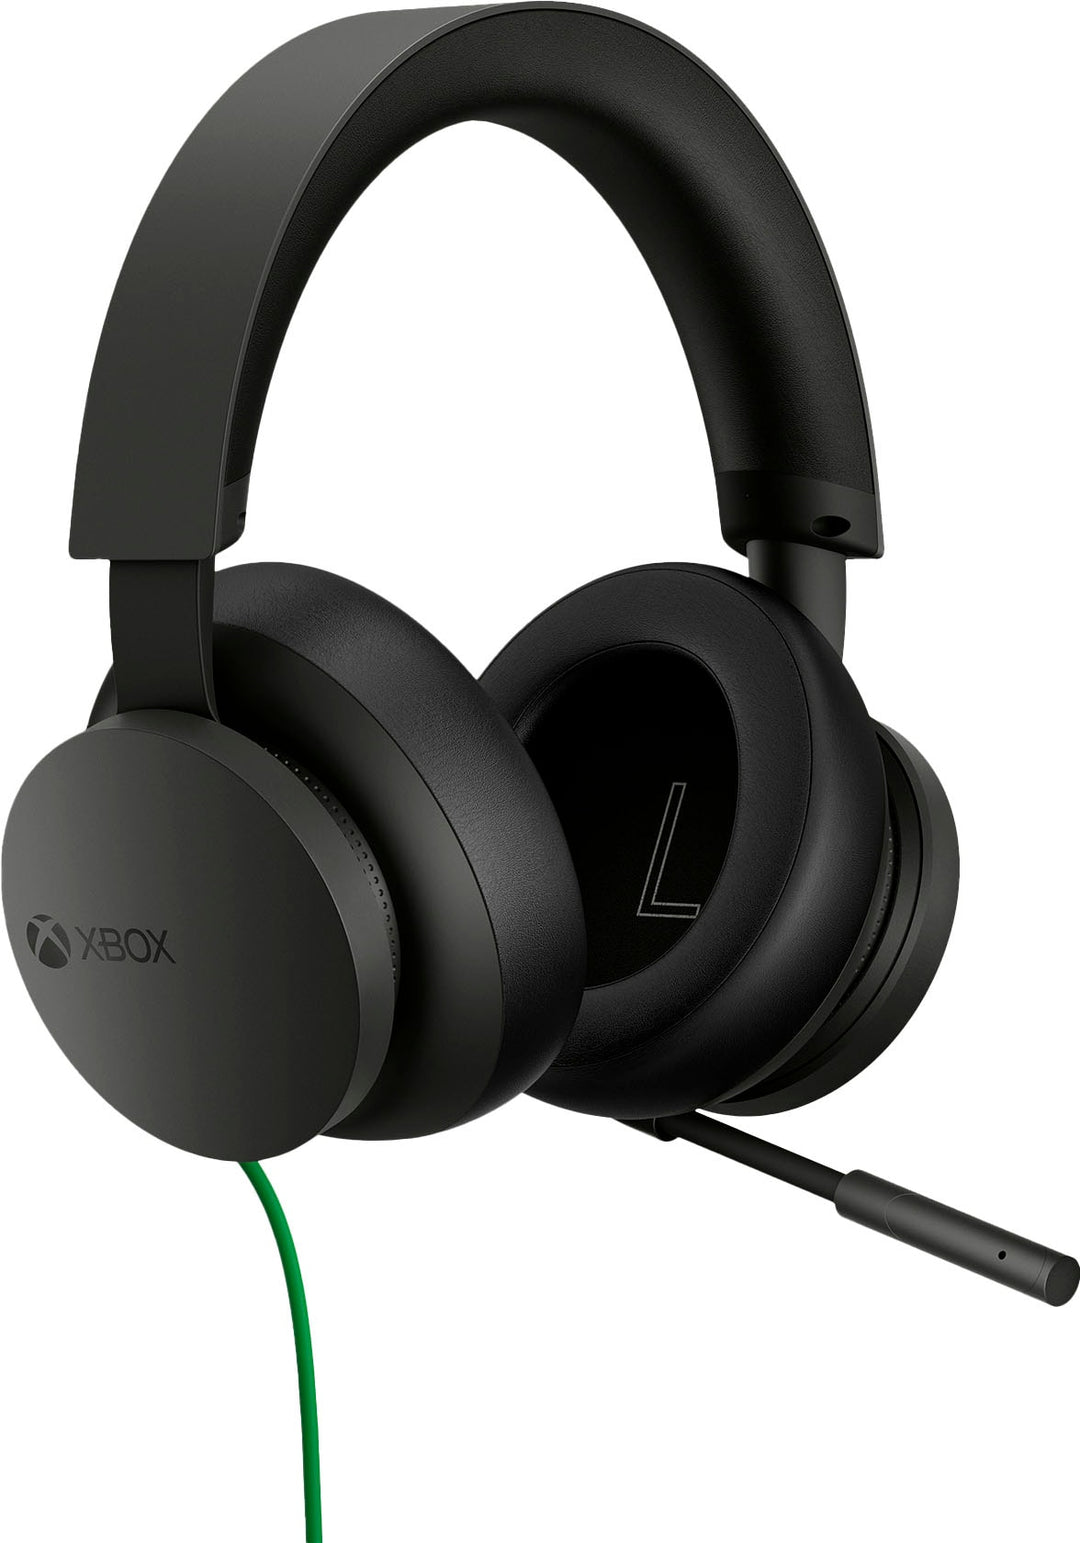 Microsoft - Xbox Stereo Headset for Xbox Series X|S, Xbox One, and Windows 10/11 Devices - Black_6